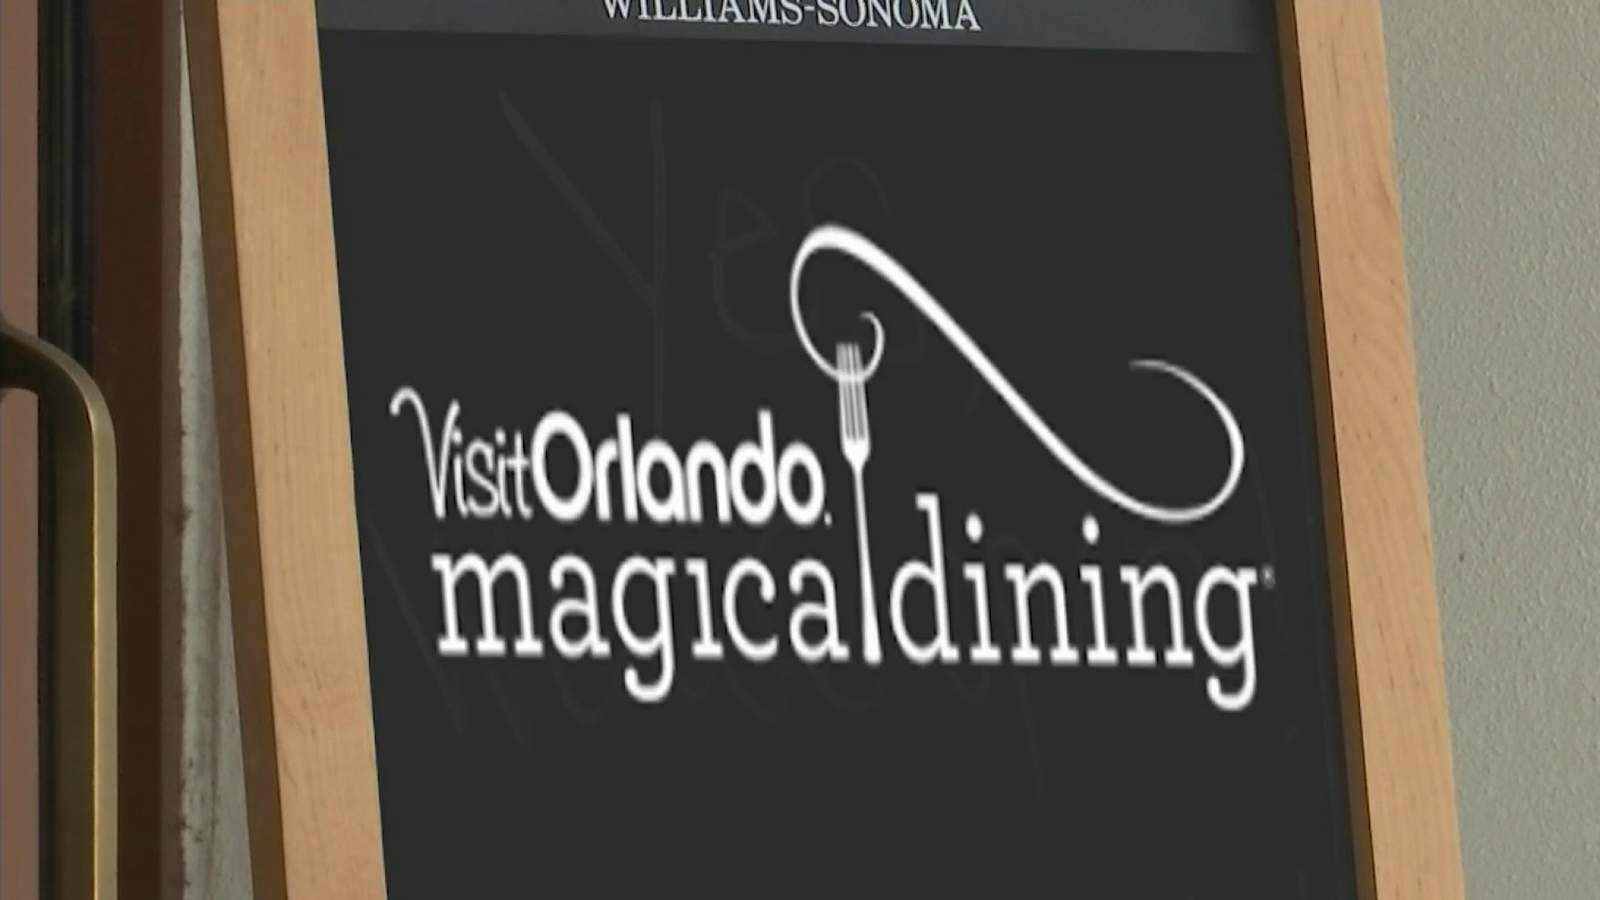 Restaurants look for boost as Visit Orlando’s Magical Dining begins